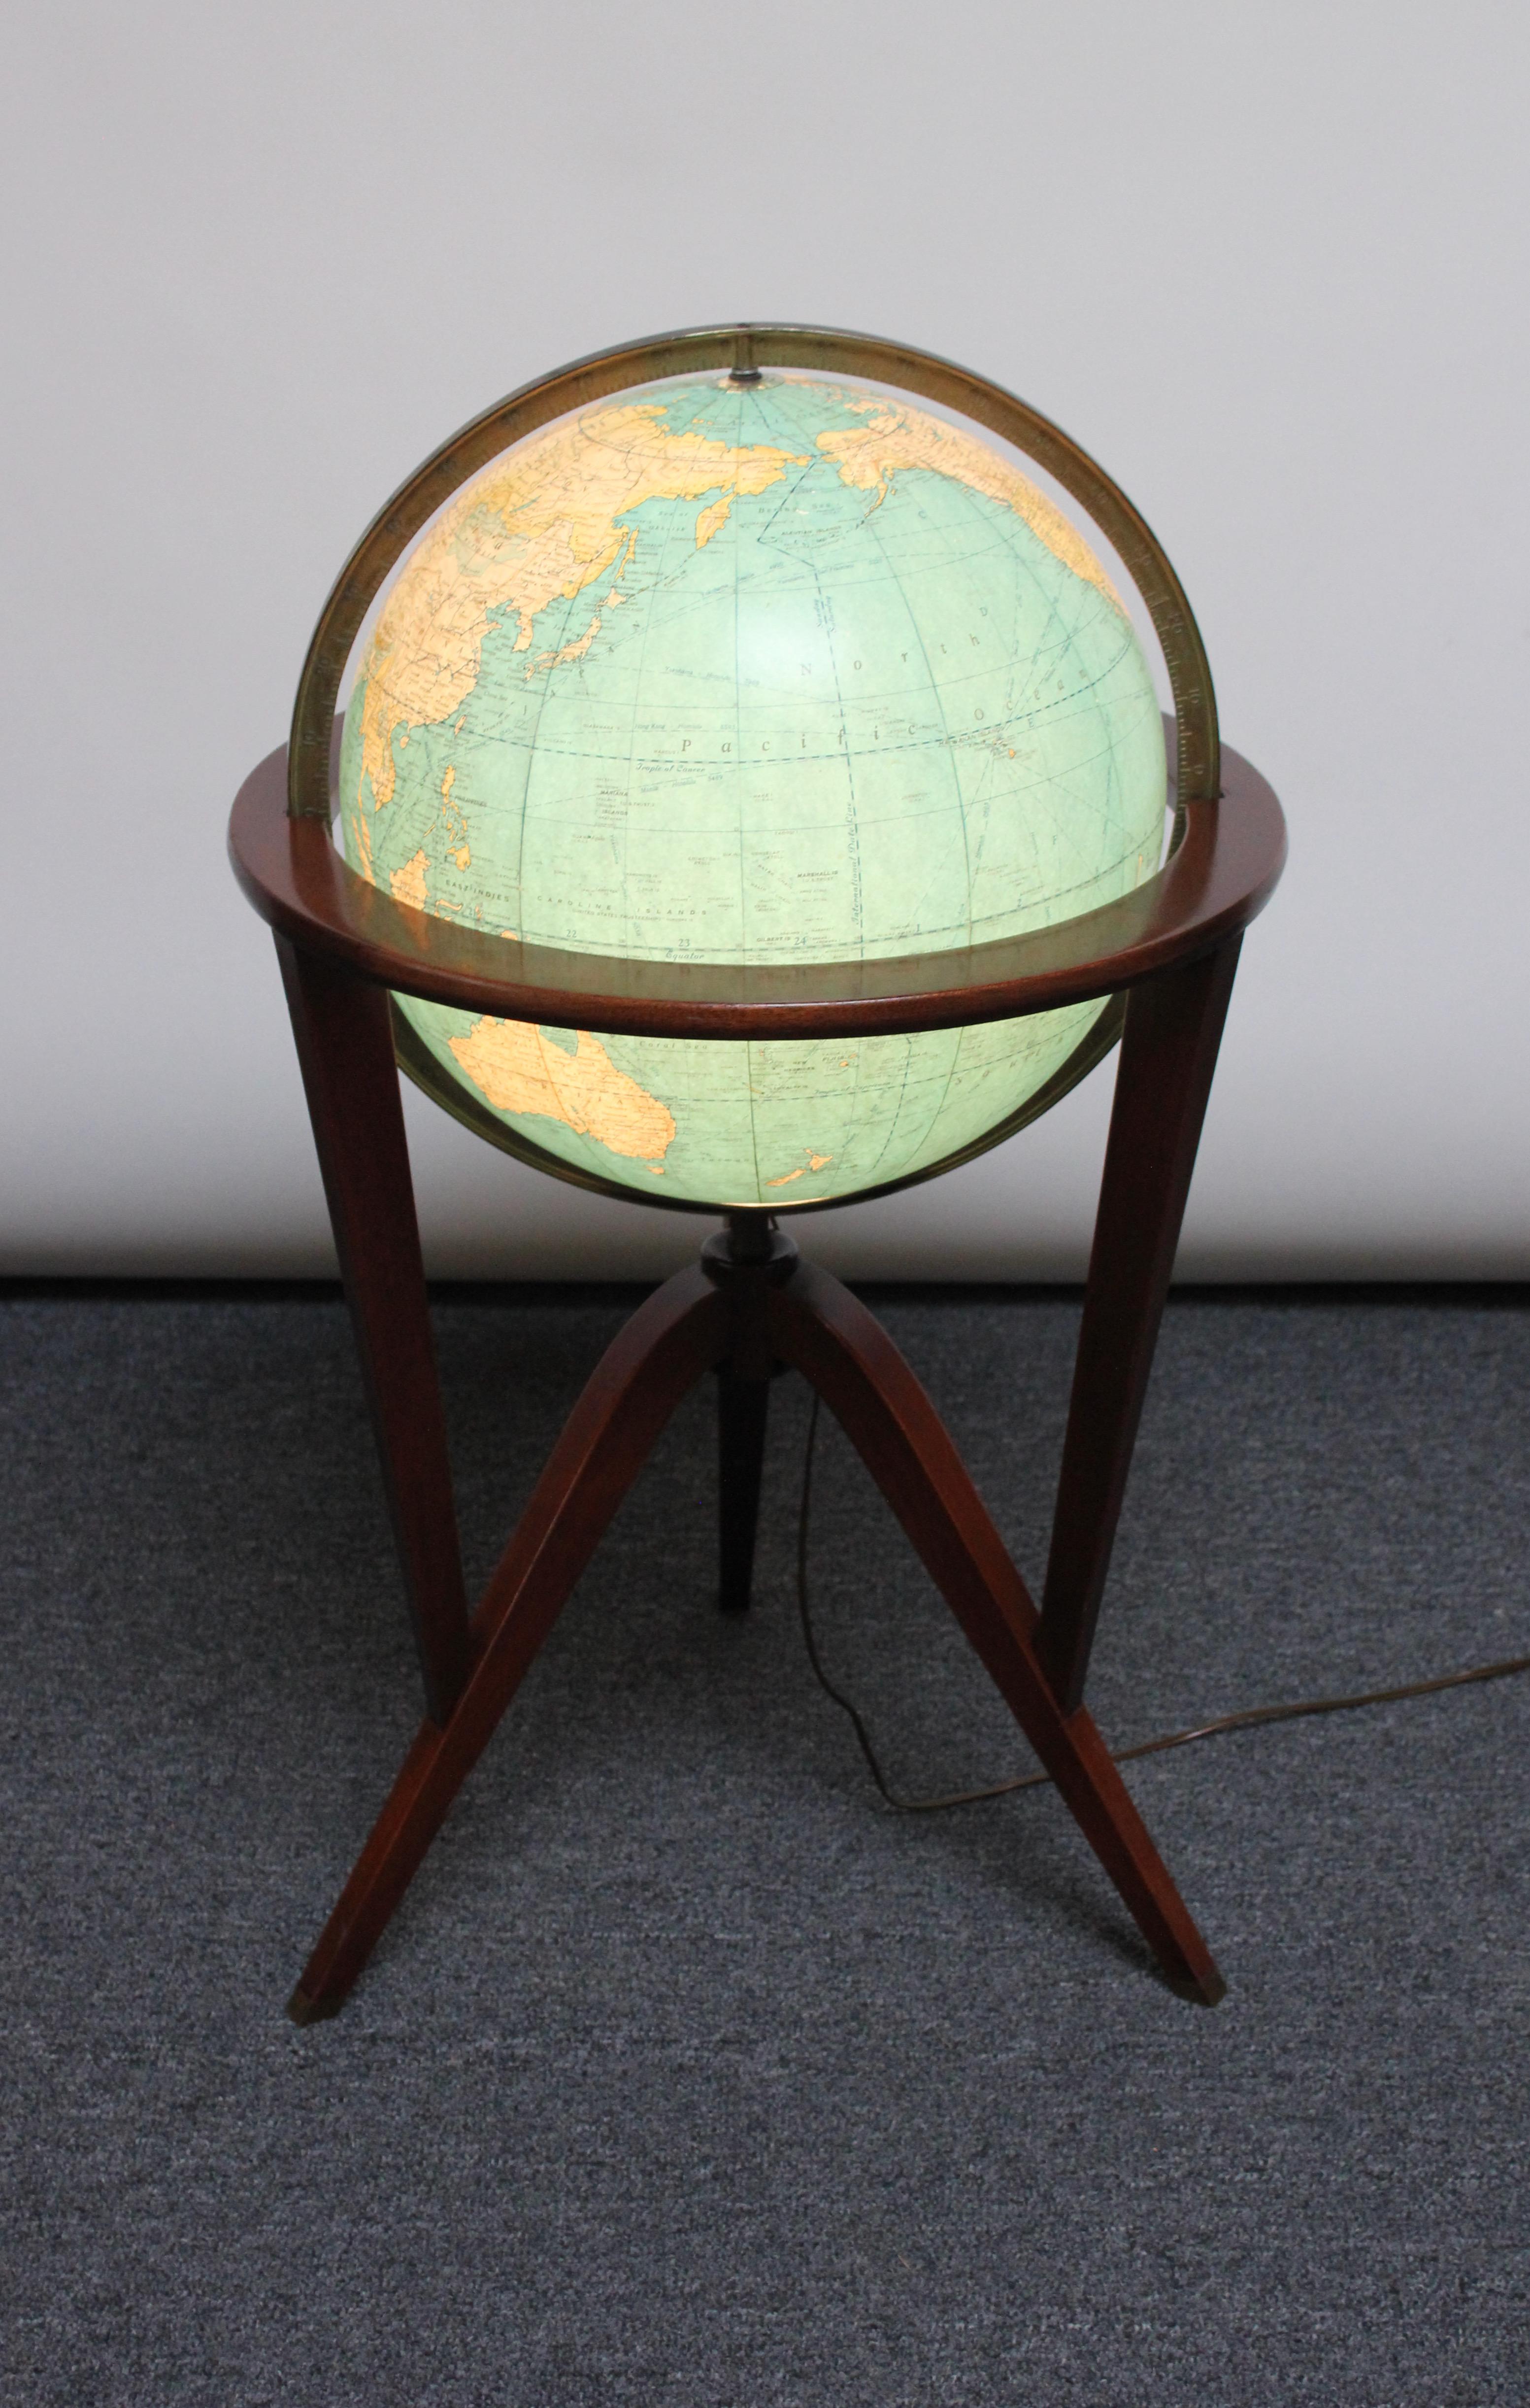 Mahogany sculptural globe stand supported by brass sabots originally designed by Edward Wormley for Dunbar in 1953. The globe itself is a 16